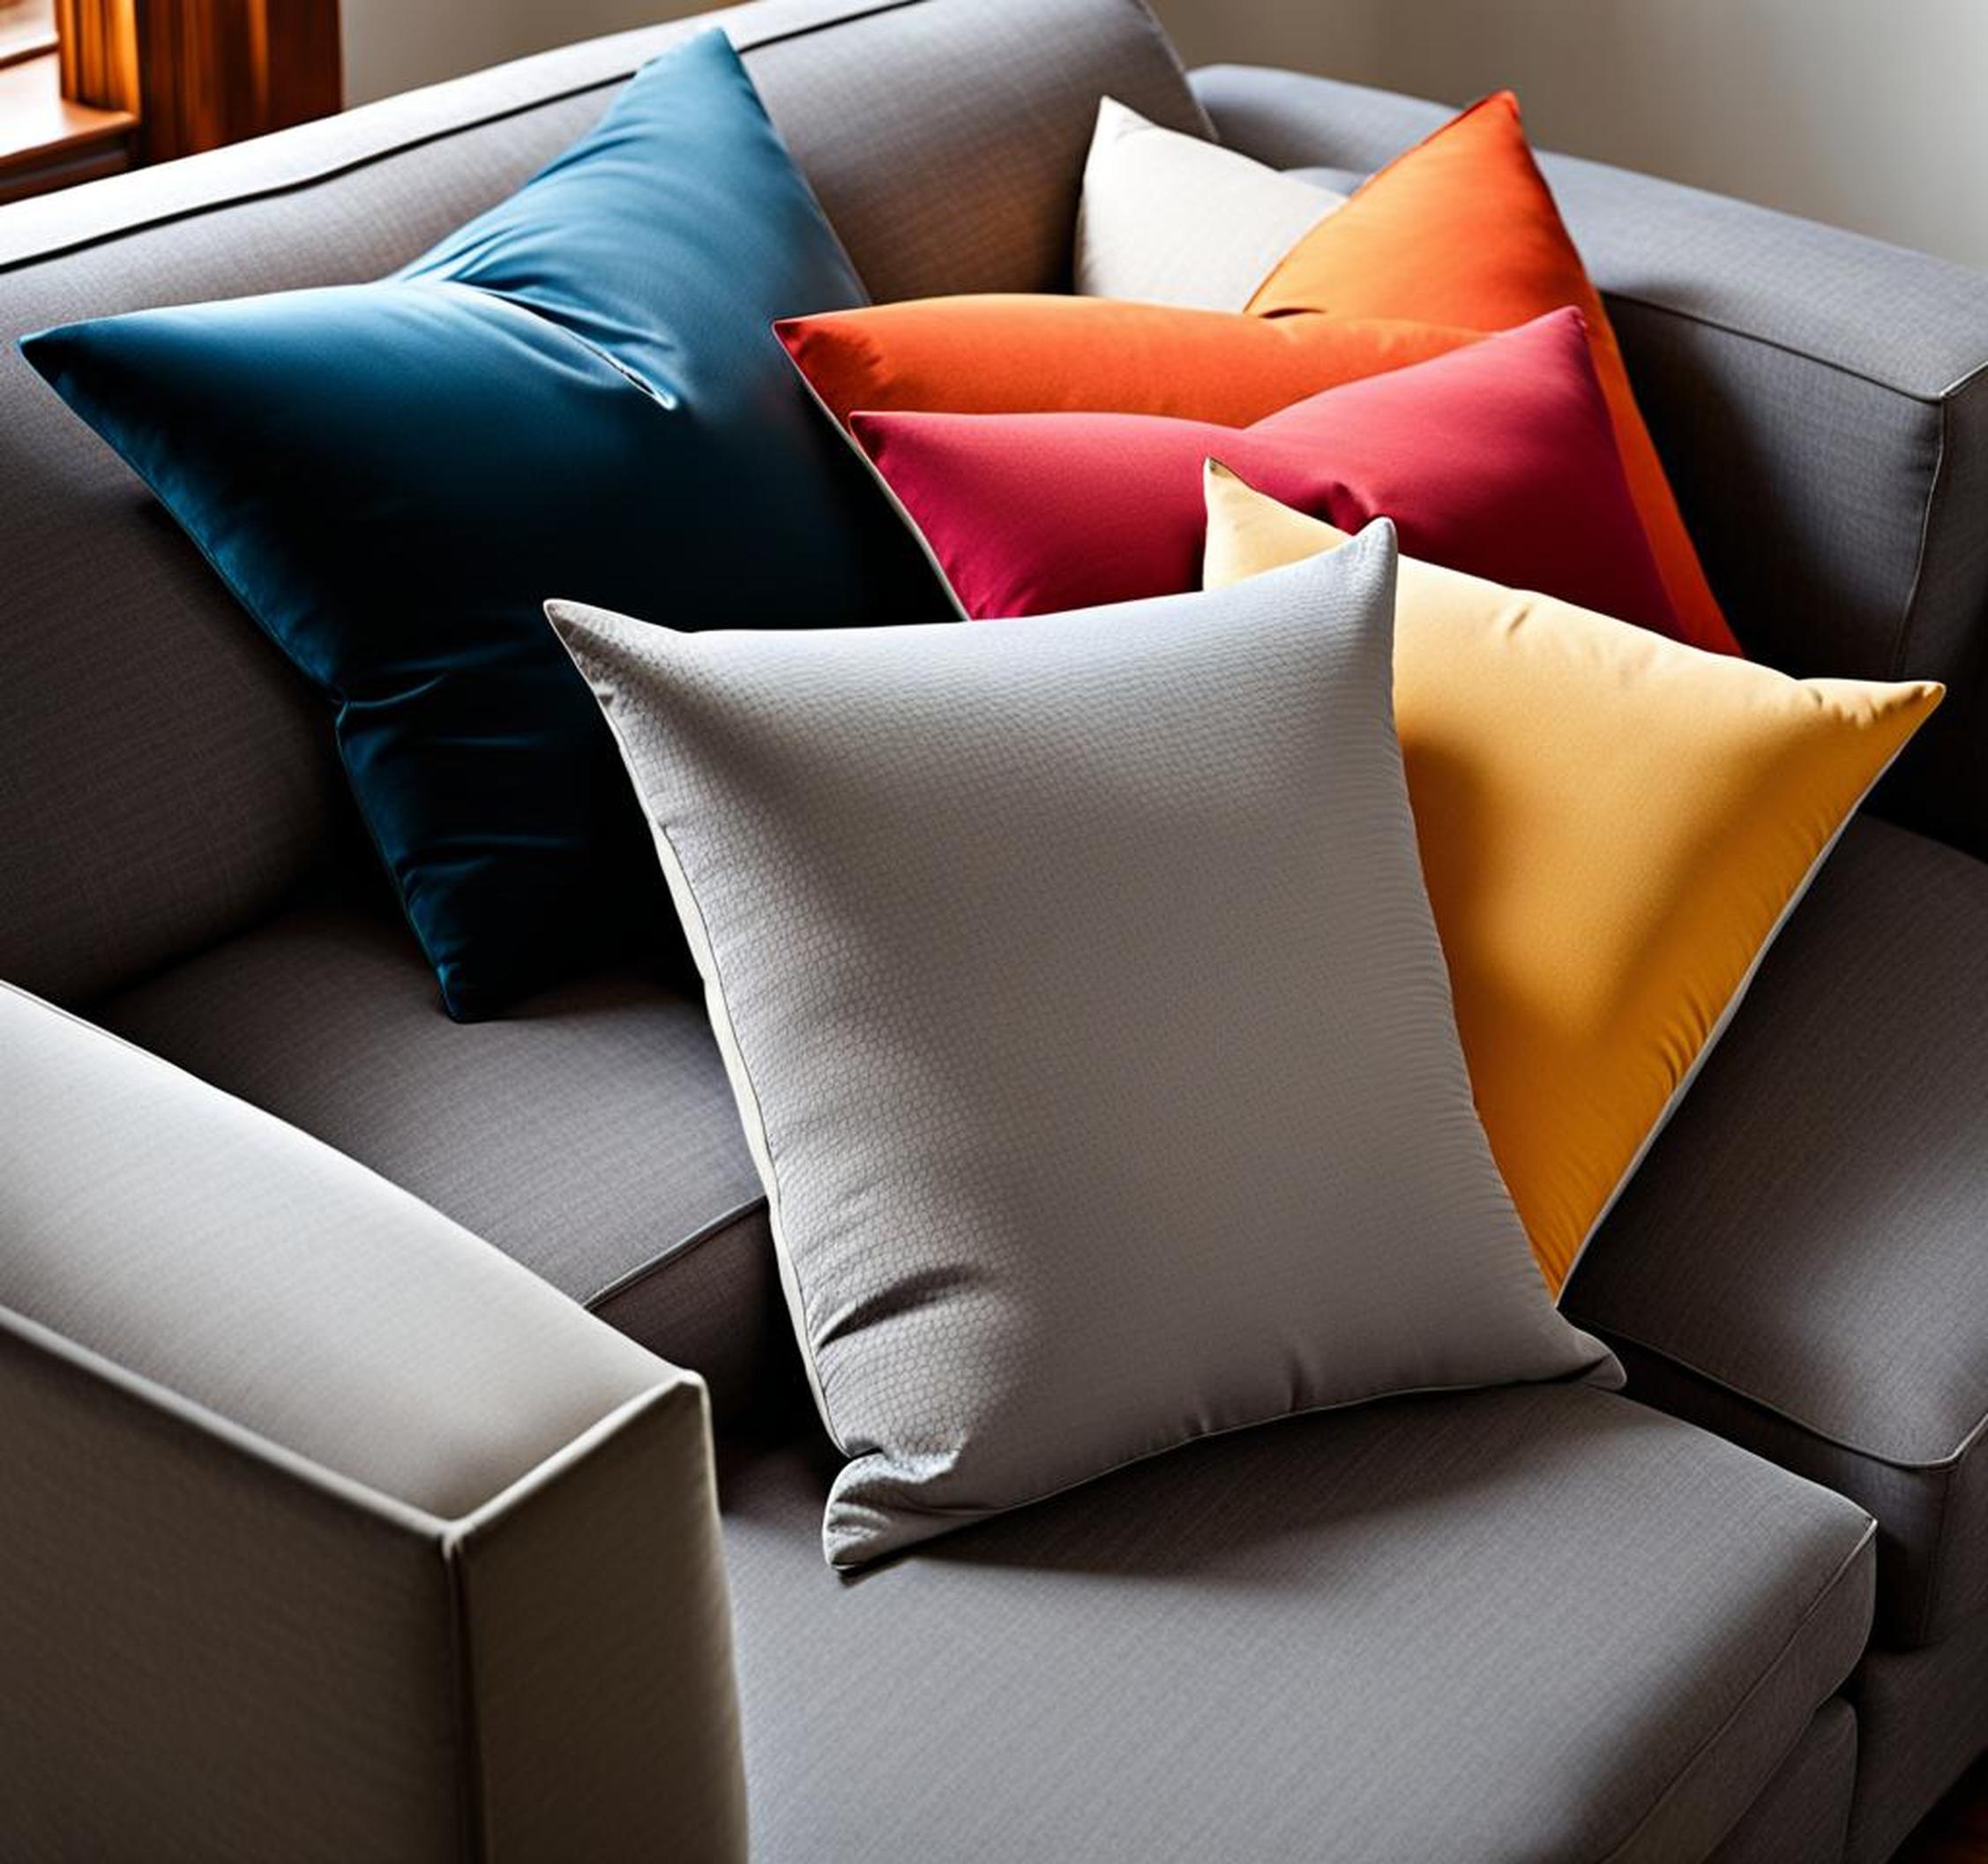 what color pillows for gray couch